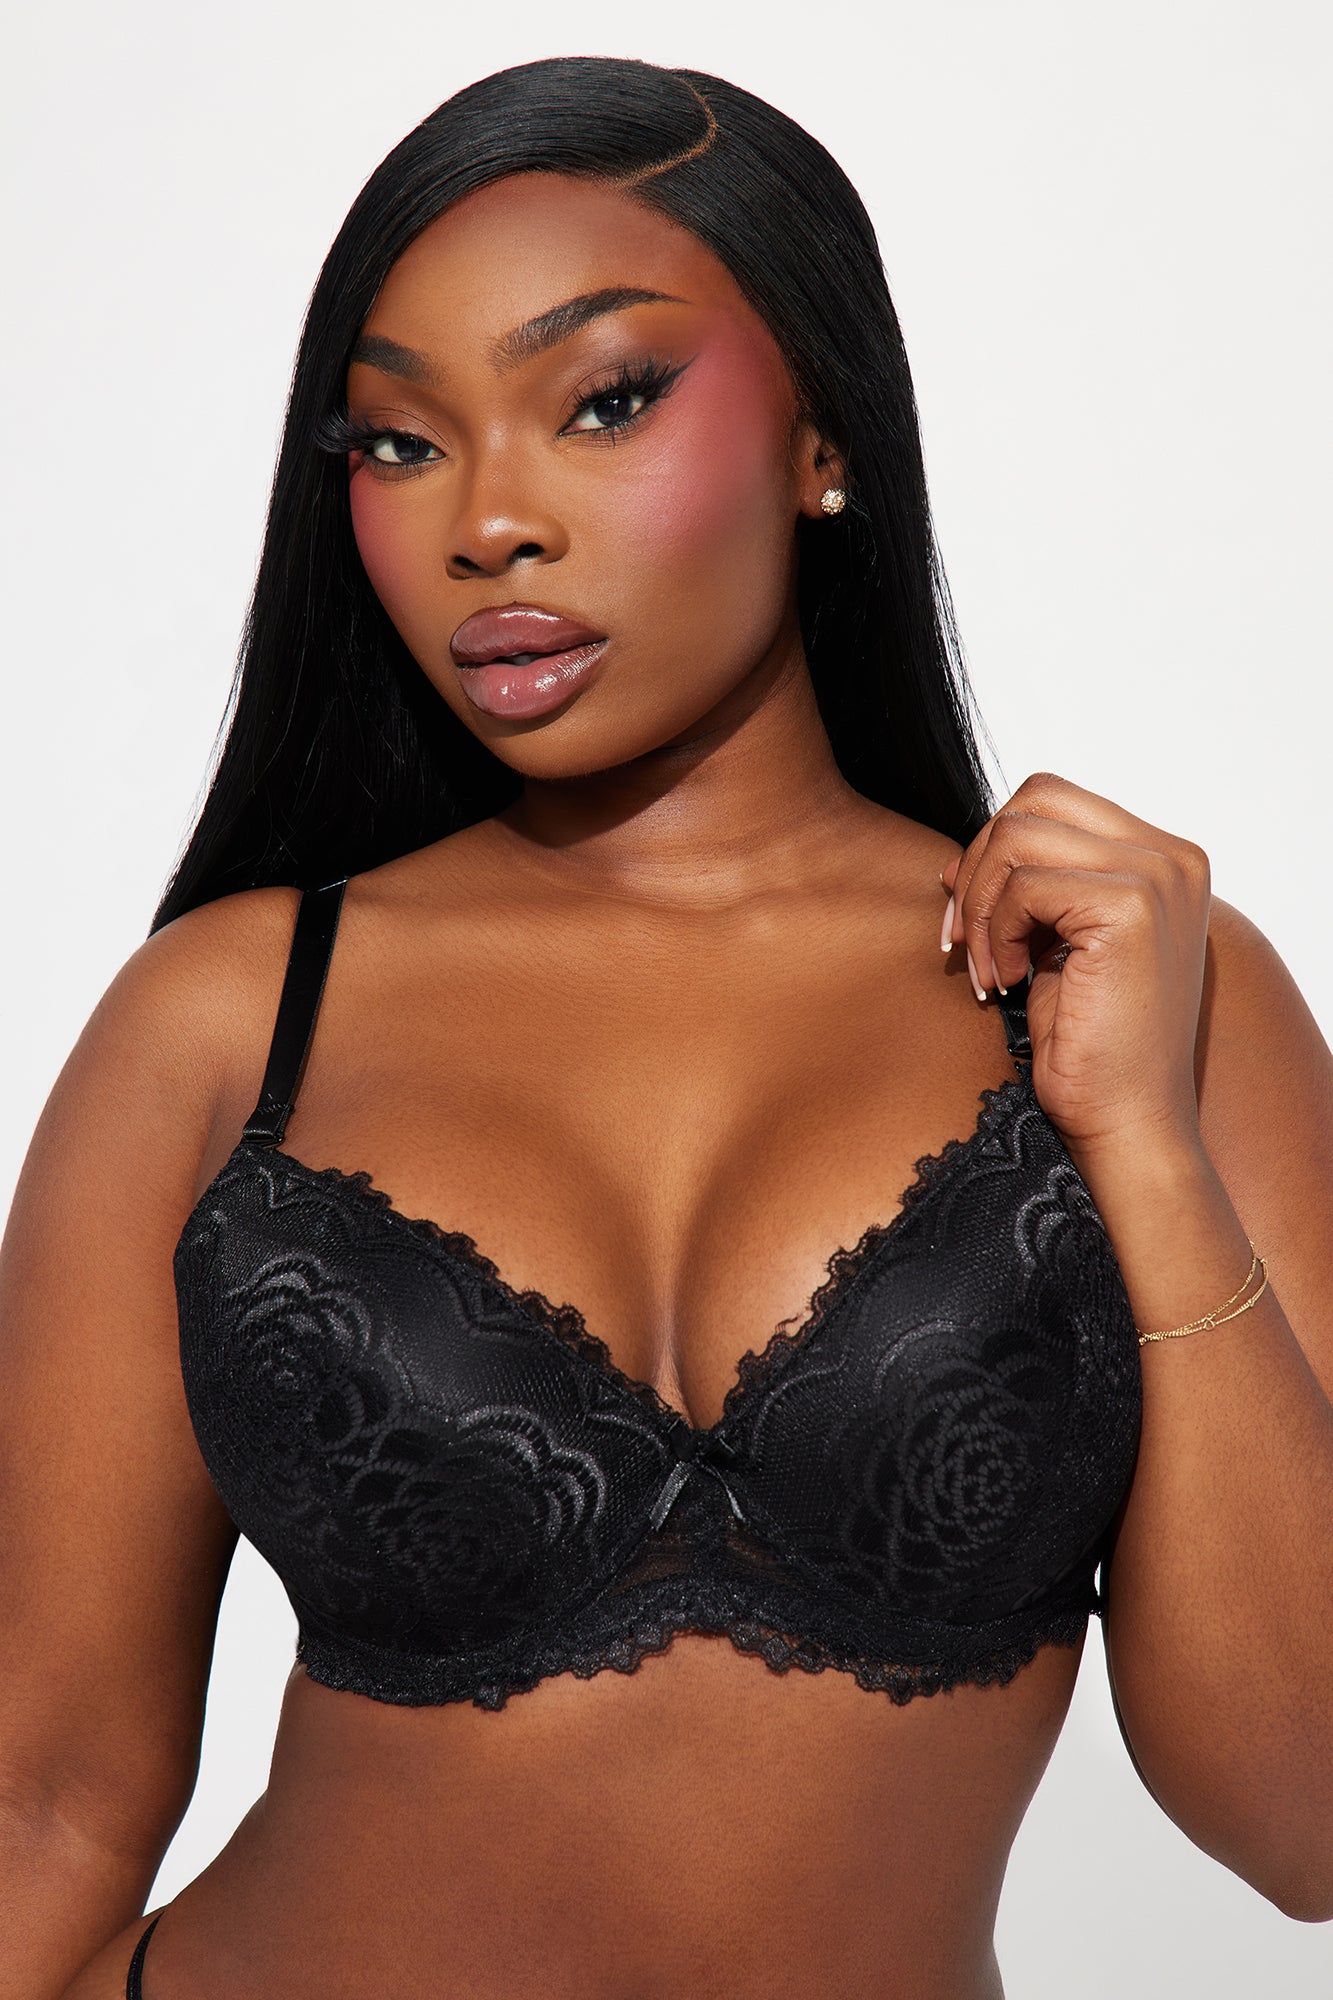 Shop now Padded bras